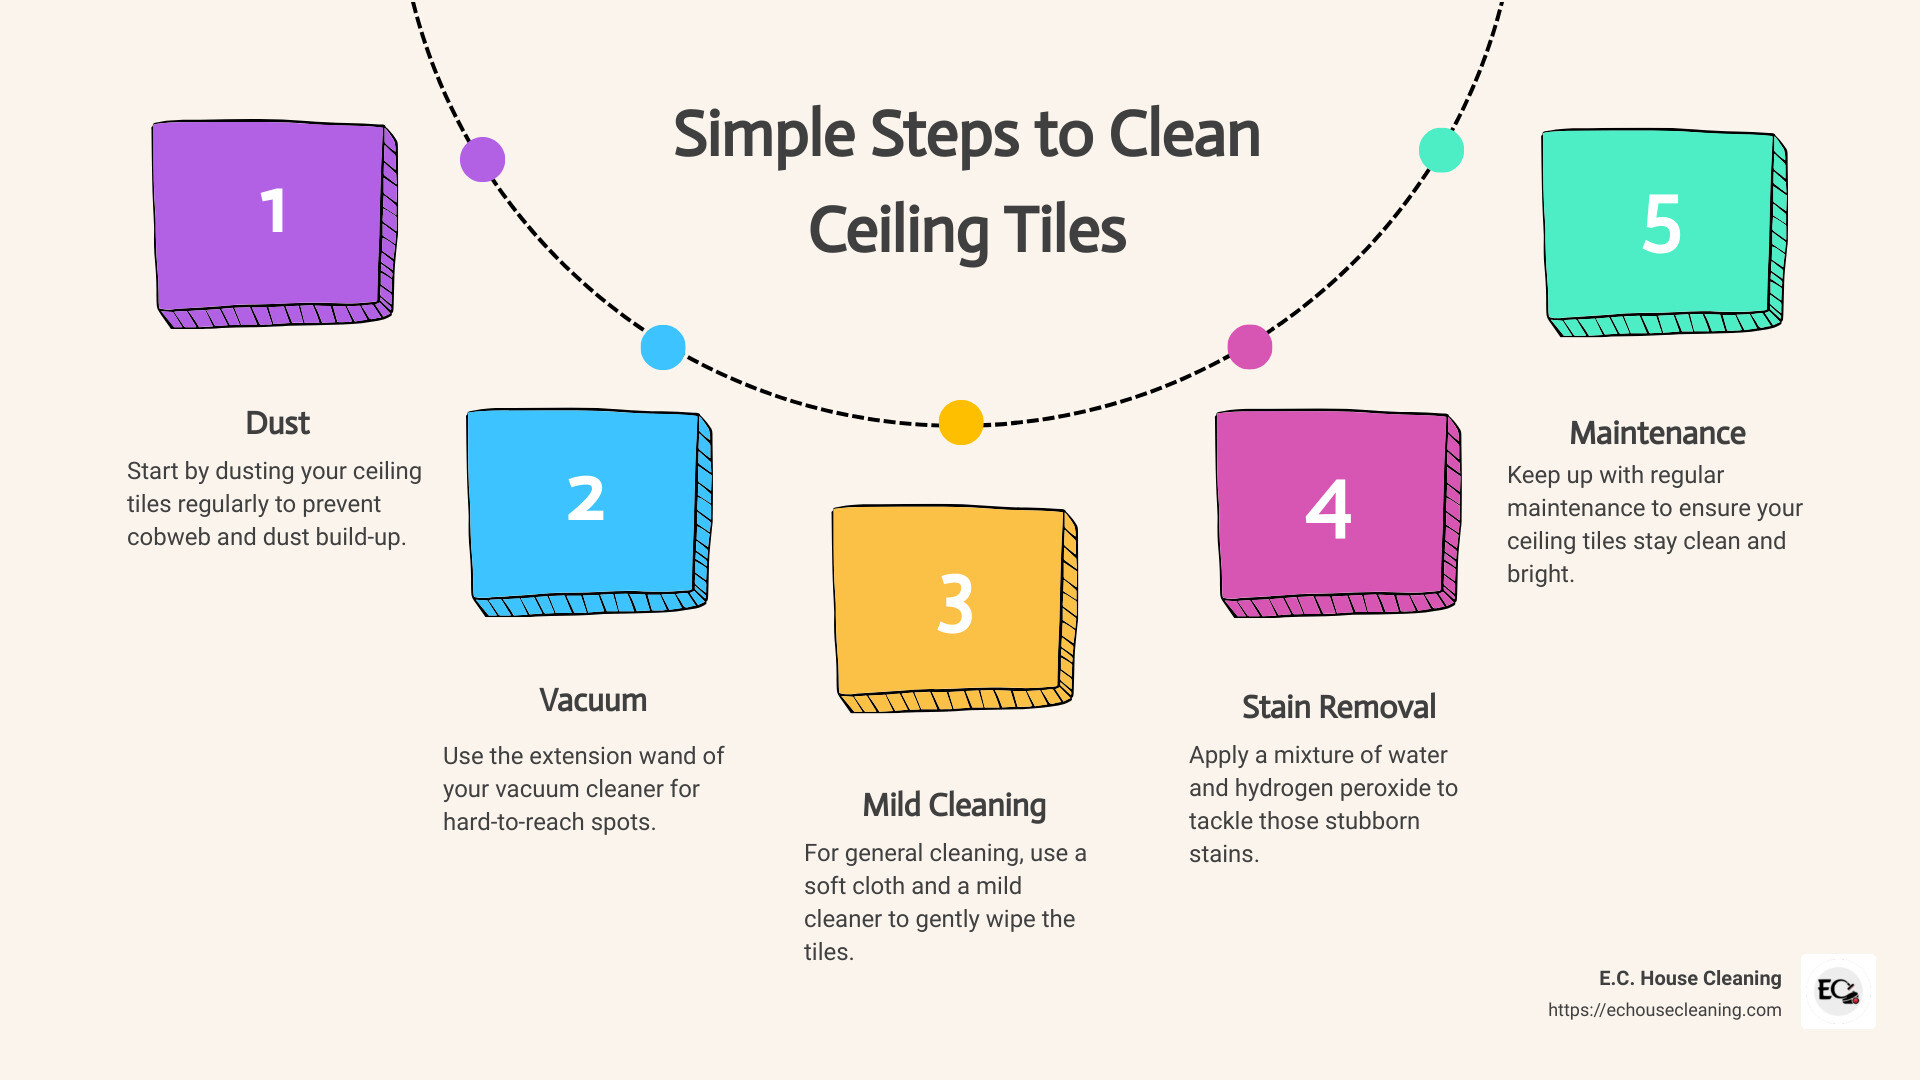 drop ceiling tiles - suspended ceiling tiles - more thorough ceiling cleaning - a few tiles - 4 steps on how to clean ceiling tiles